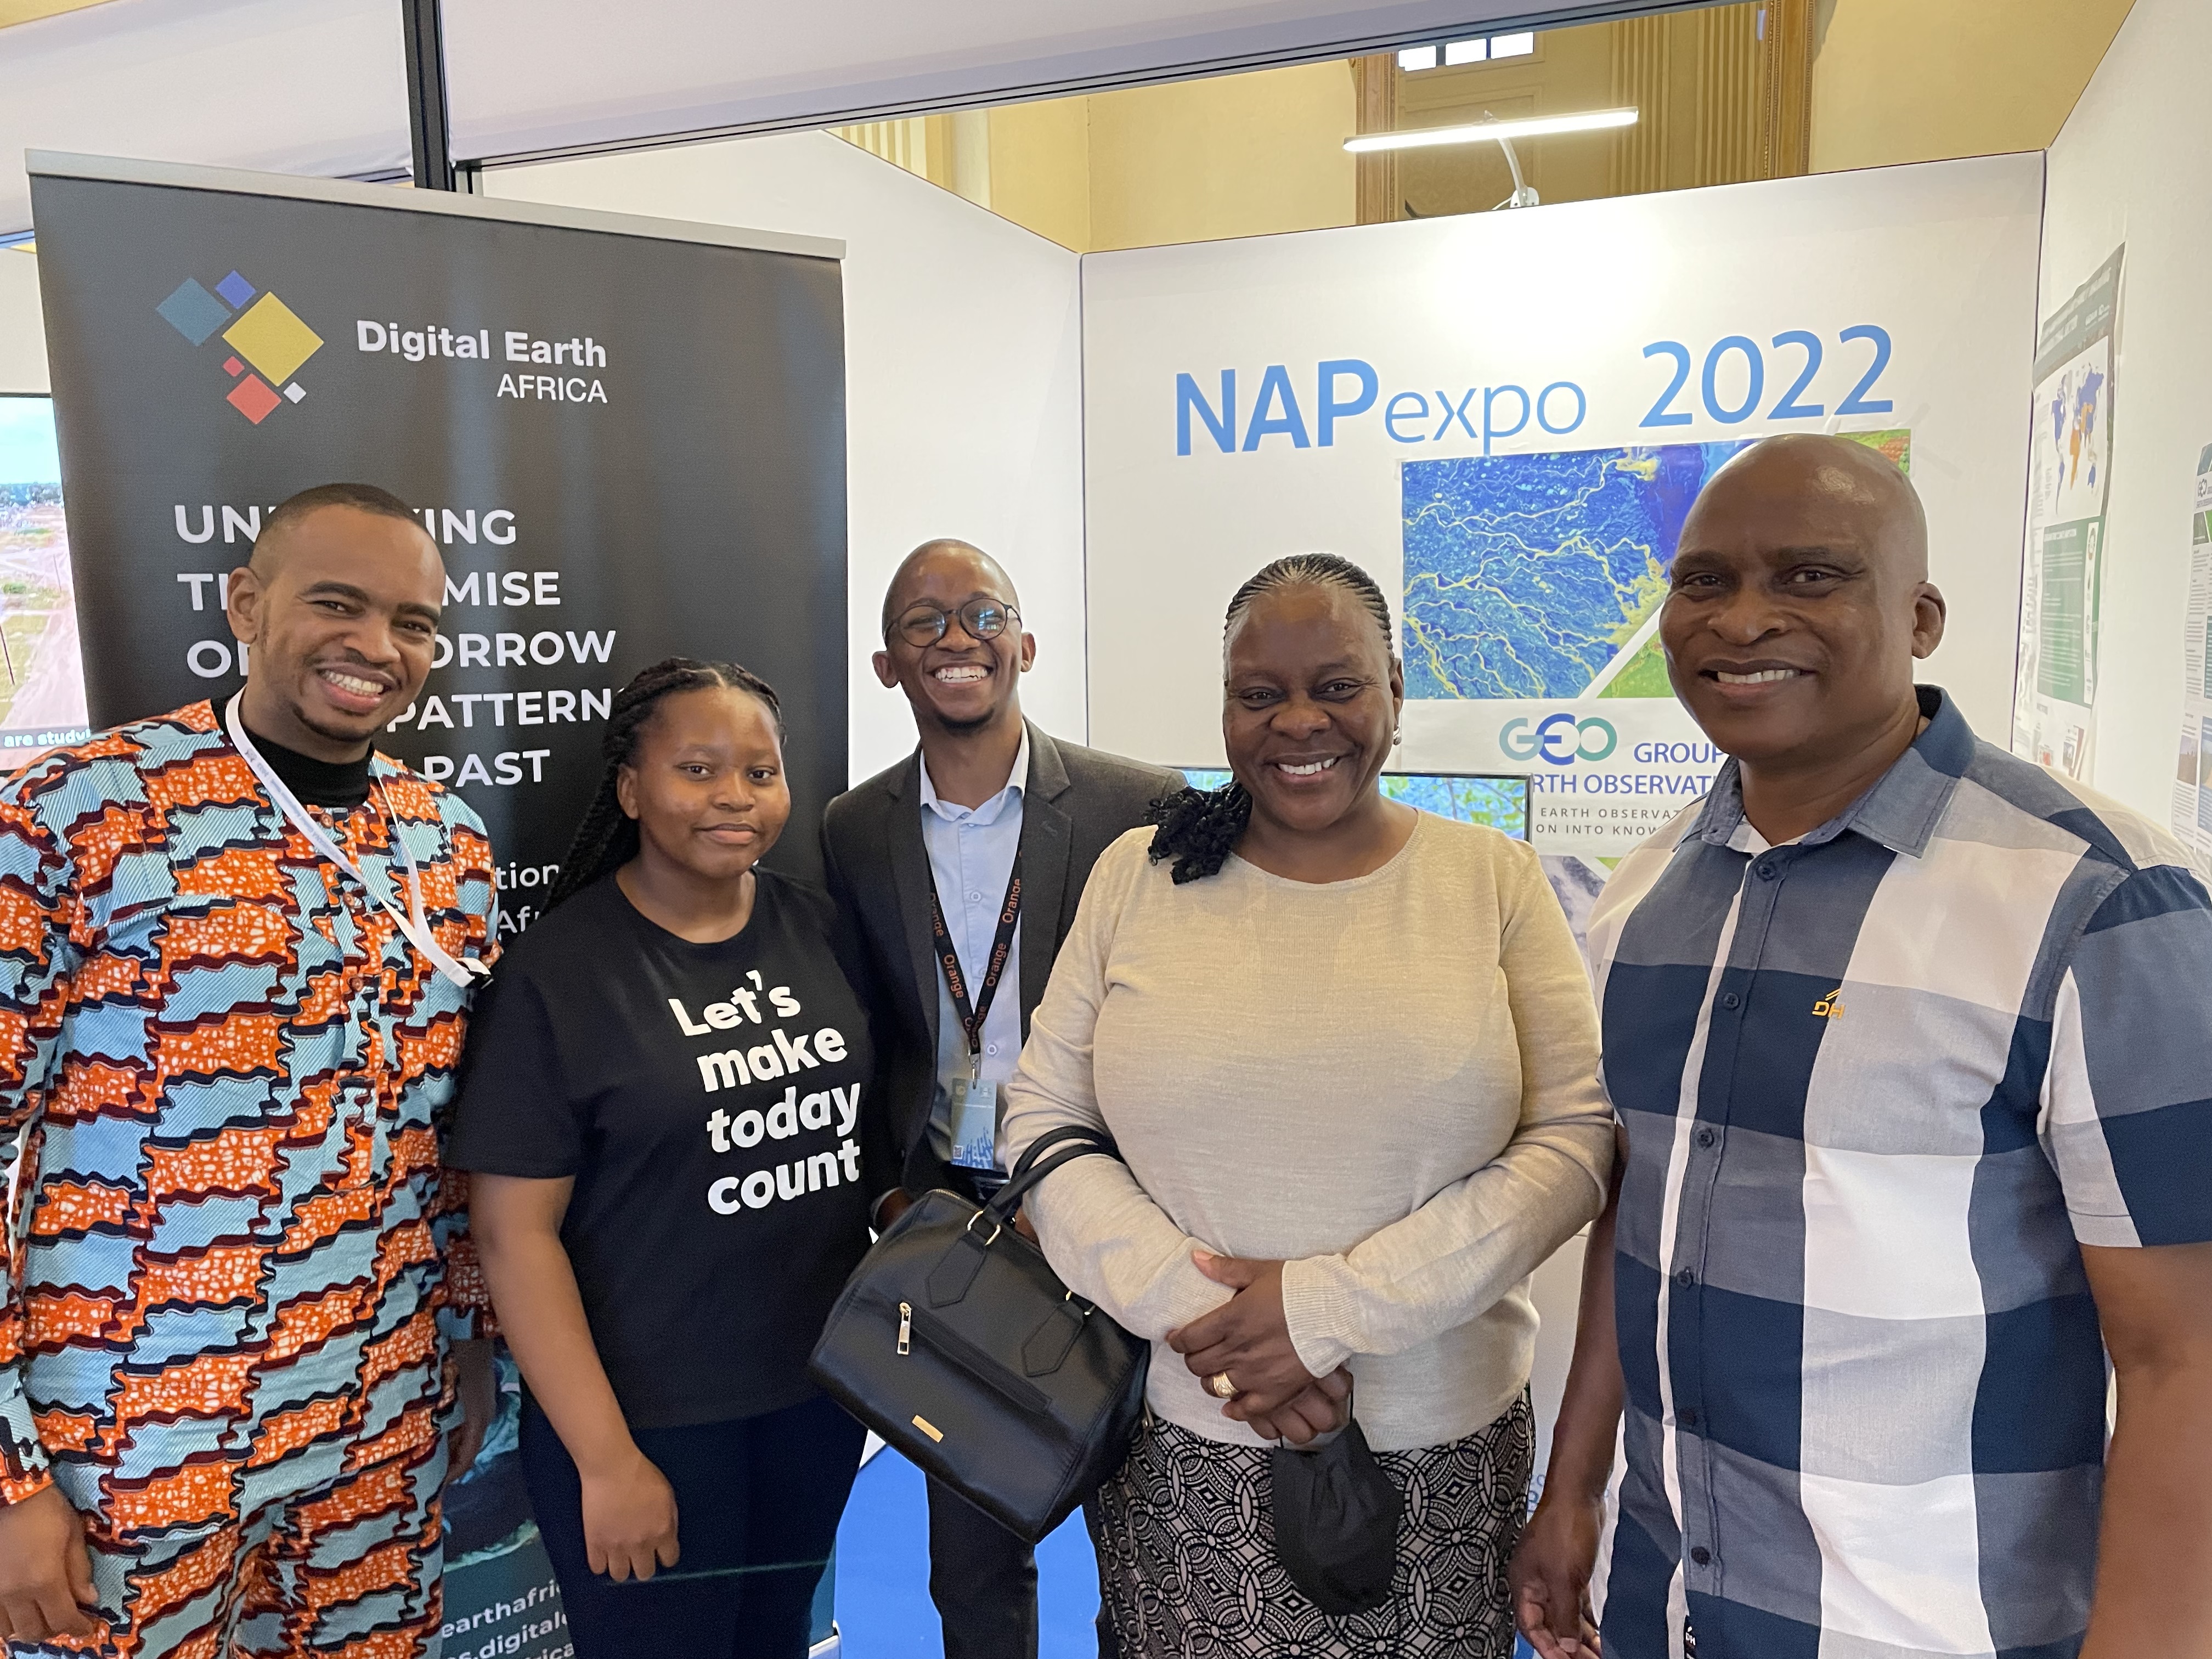 Dr. Kenneth Mubea with Ofentse Lesego, a student from University of Botswana and his parents who visited the Expo